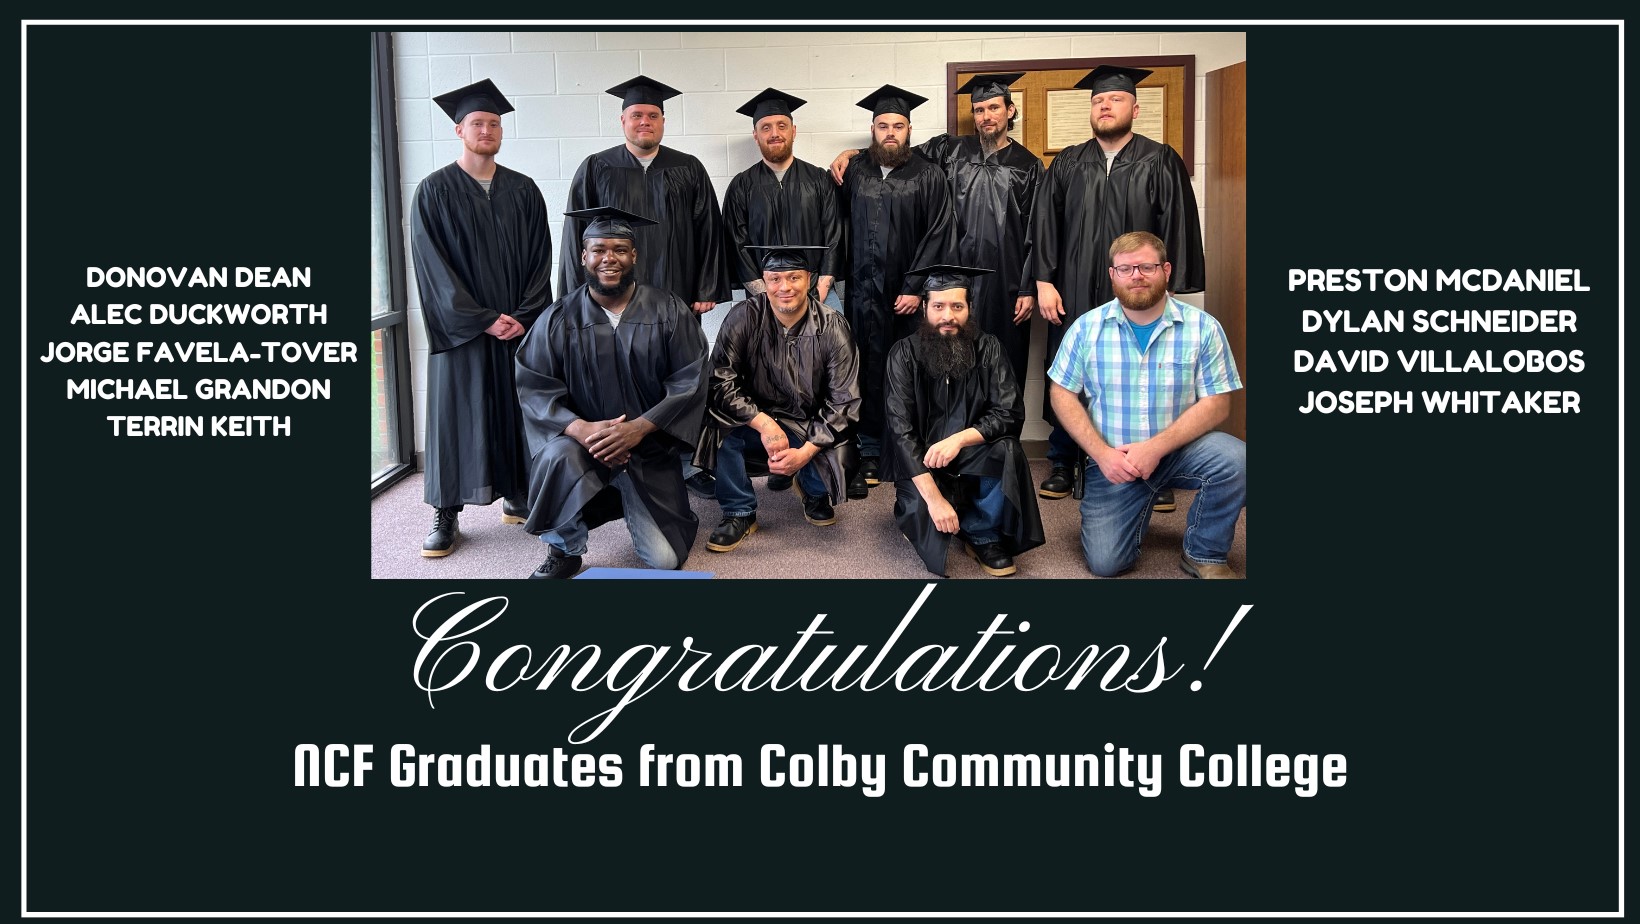 NCF/Colby Community College Graduates